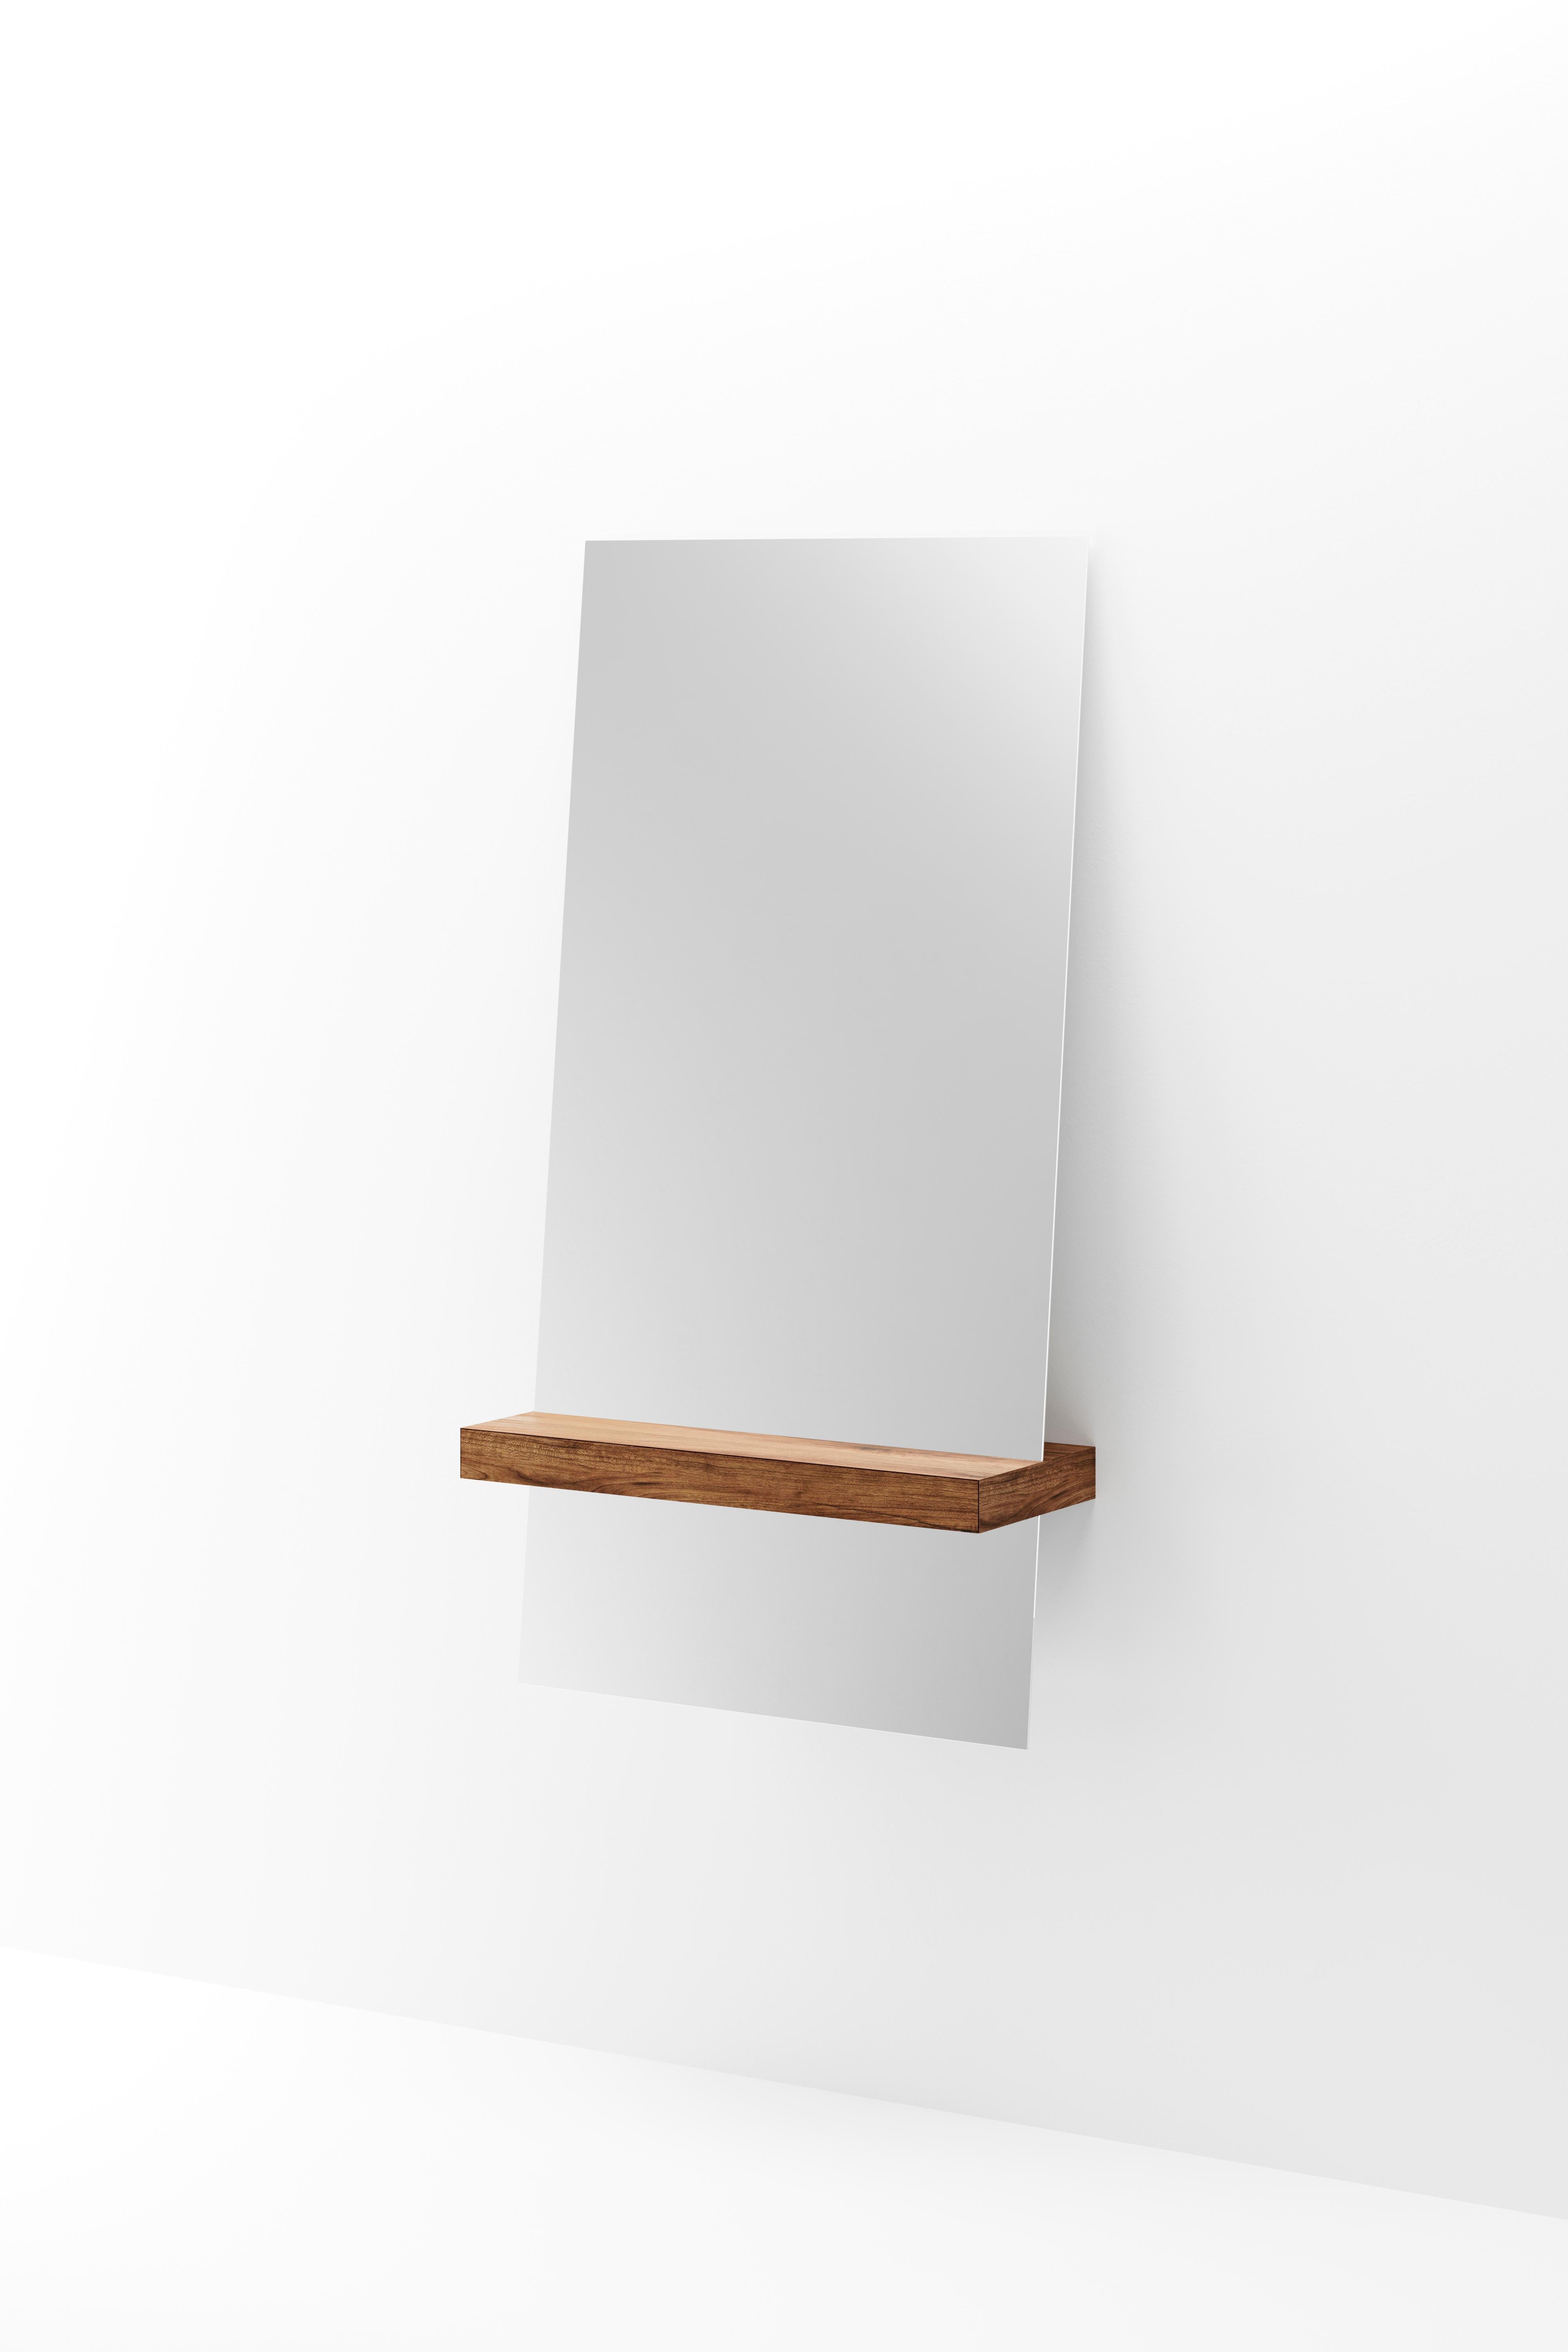 Walnut rectangular Guillotine mirror by Jeffrey Huyghe.
Dimensions: D 30 x W 80 x H 156.5 cm
Materials: Walnut natural oiled, mirror.
Also available in different materials. 

Guillotine is designed with the idea in mind to keep your hallway